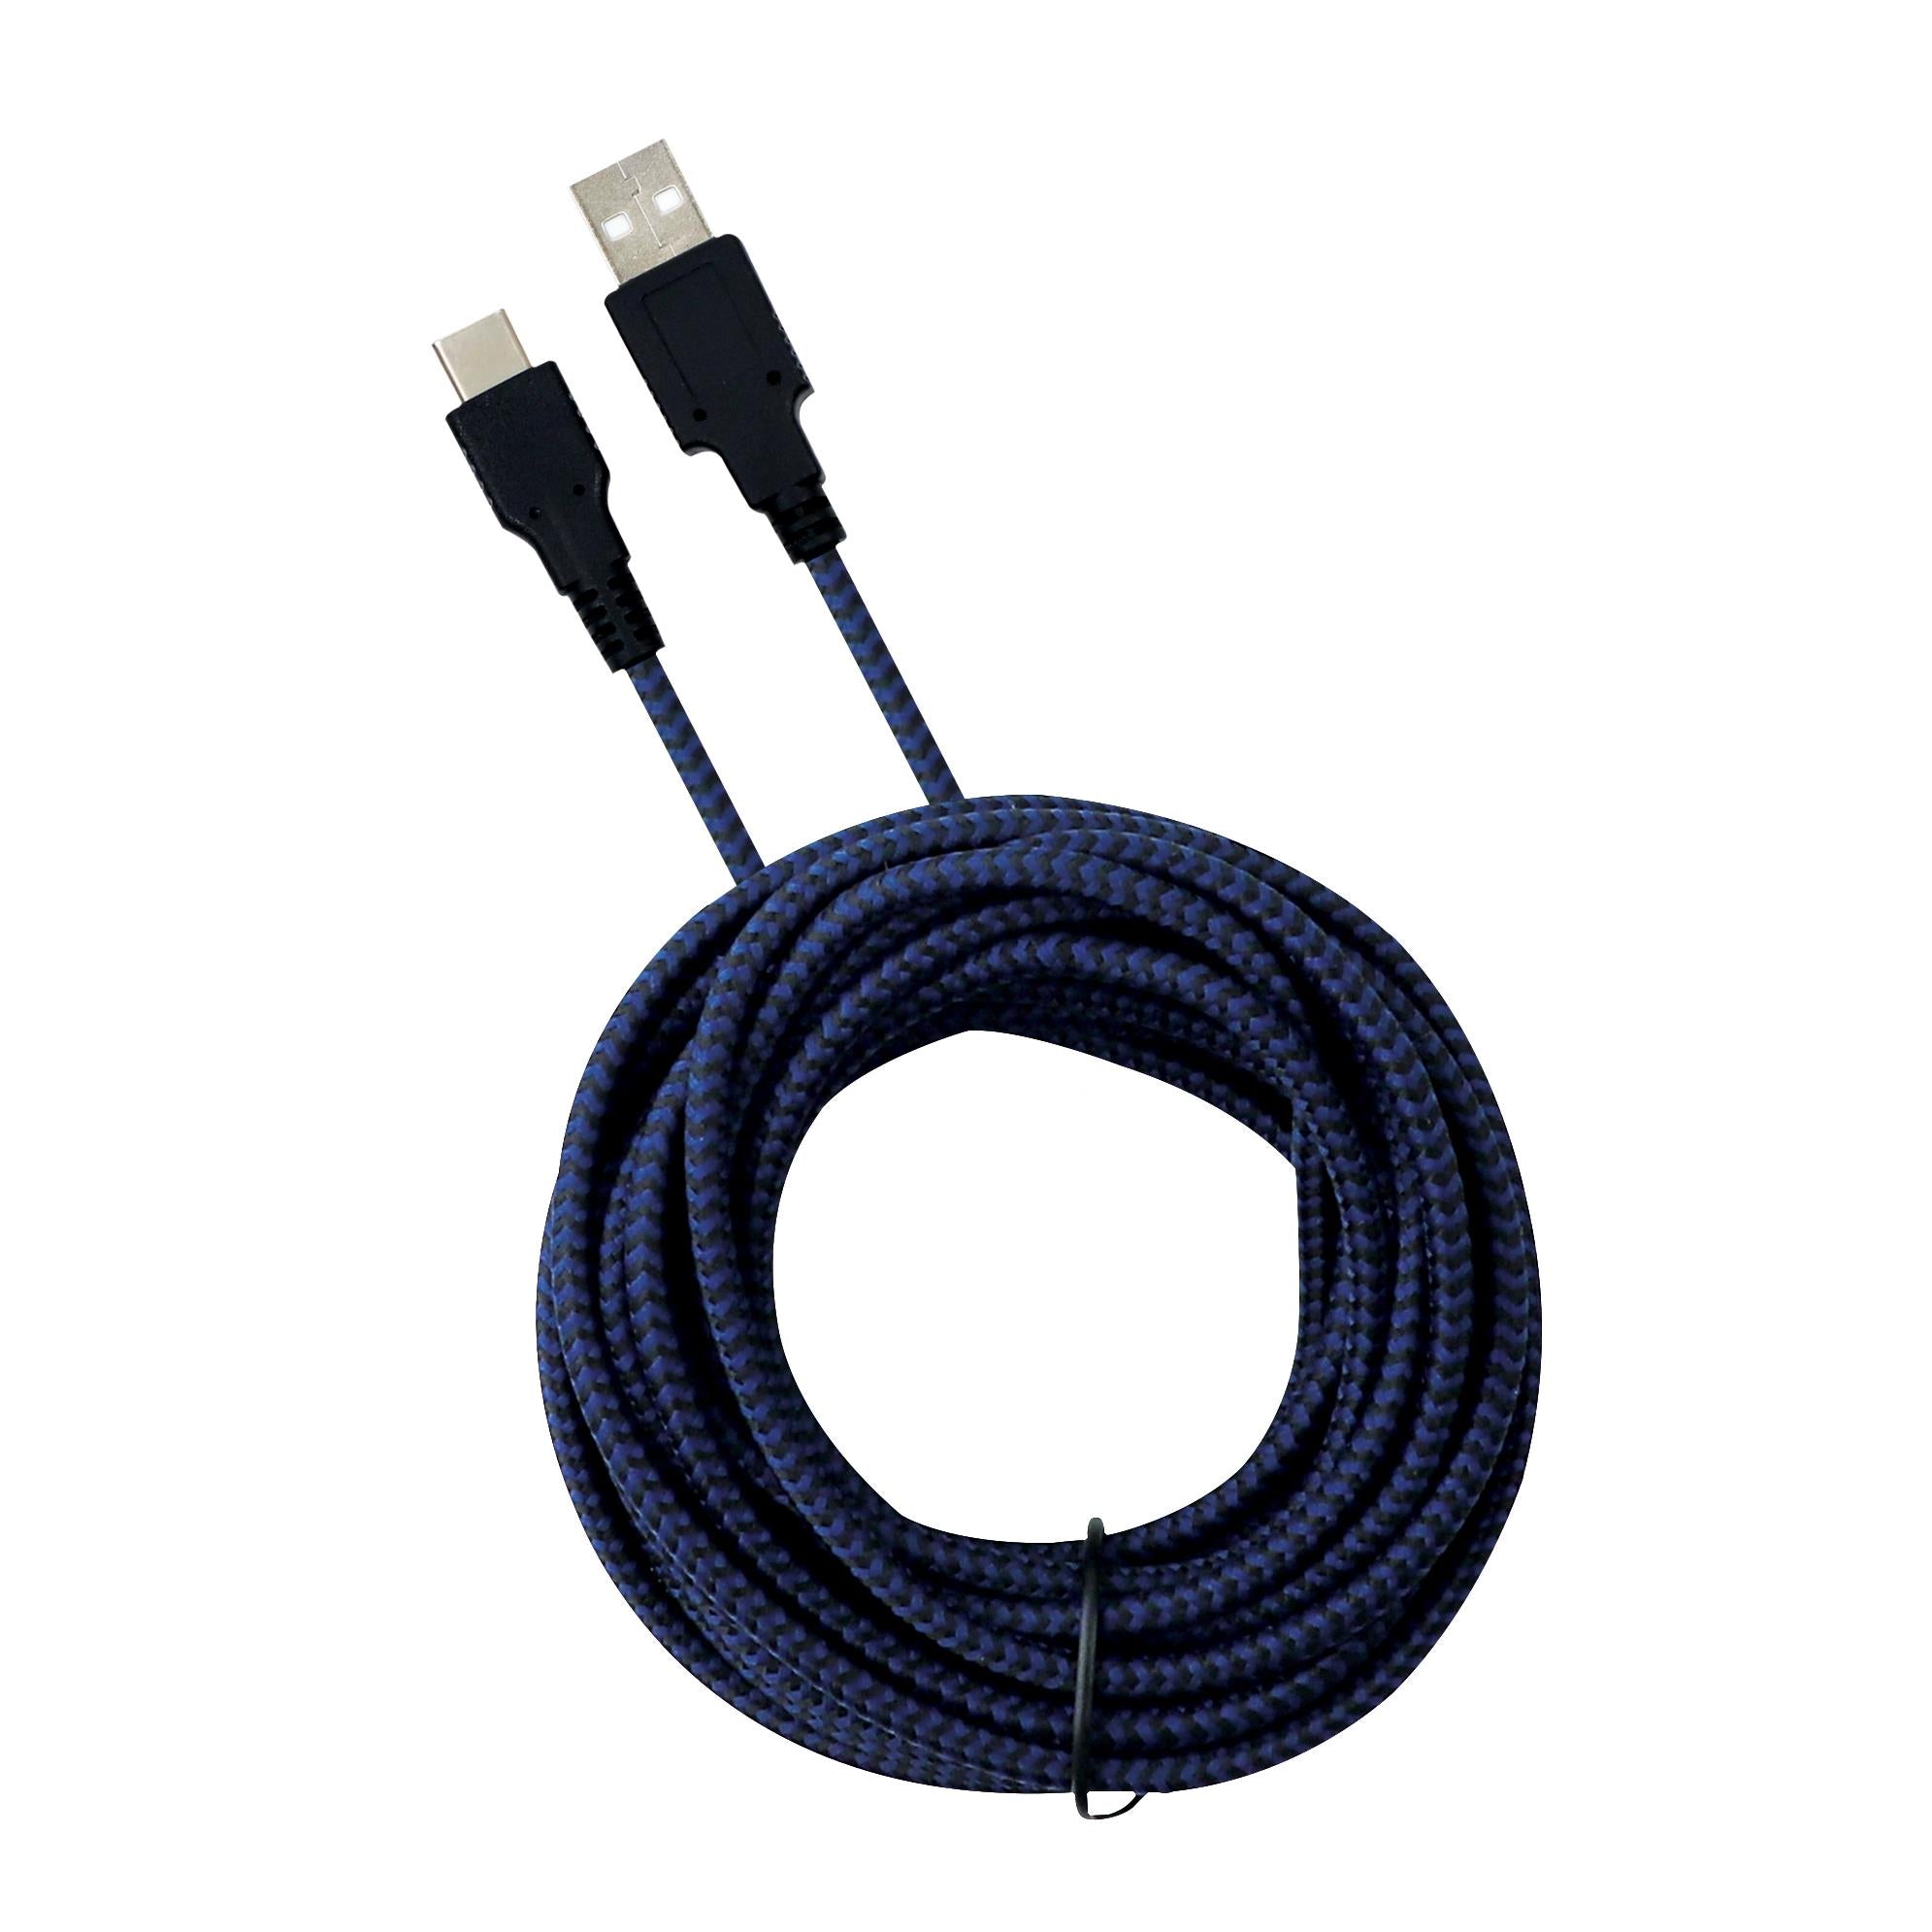 TALK WORKS Fast Charge USB-C Charger Cable for PS5 Controller - 10 Feet  Long, Heavy-Duty Braided Type C Cord Charging Compatible with Sony  Playstation